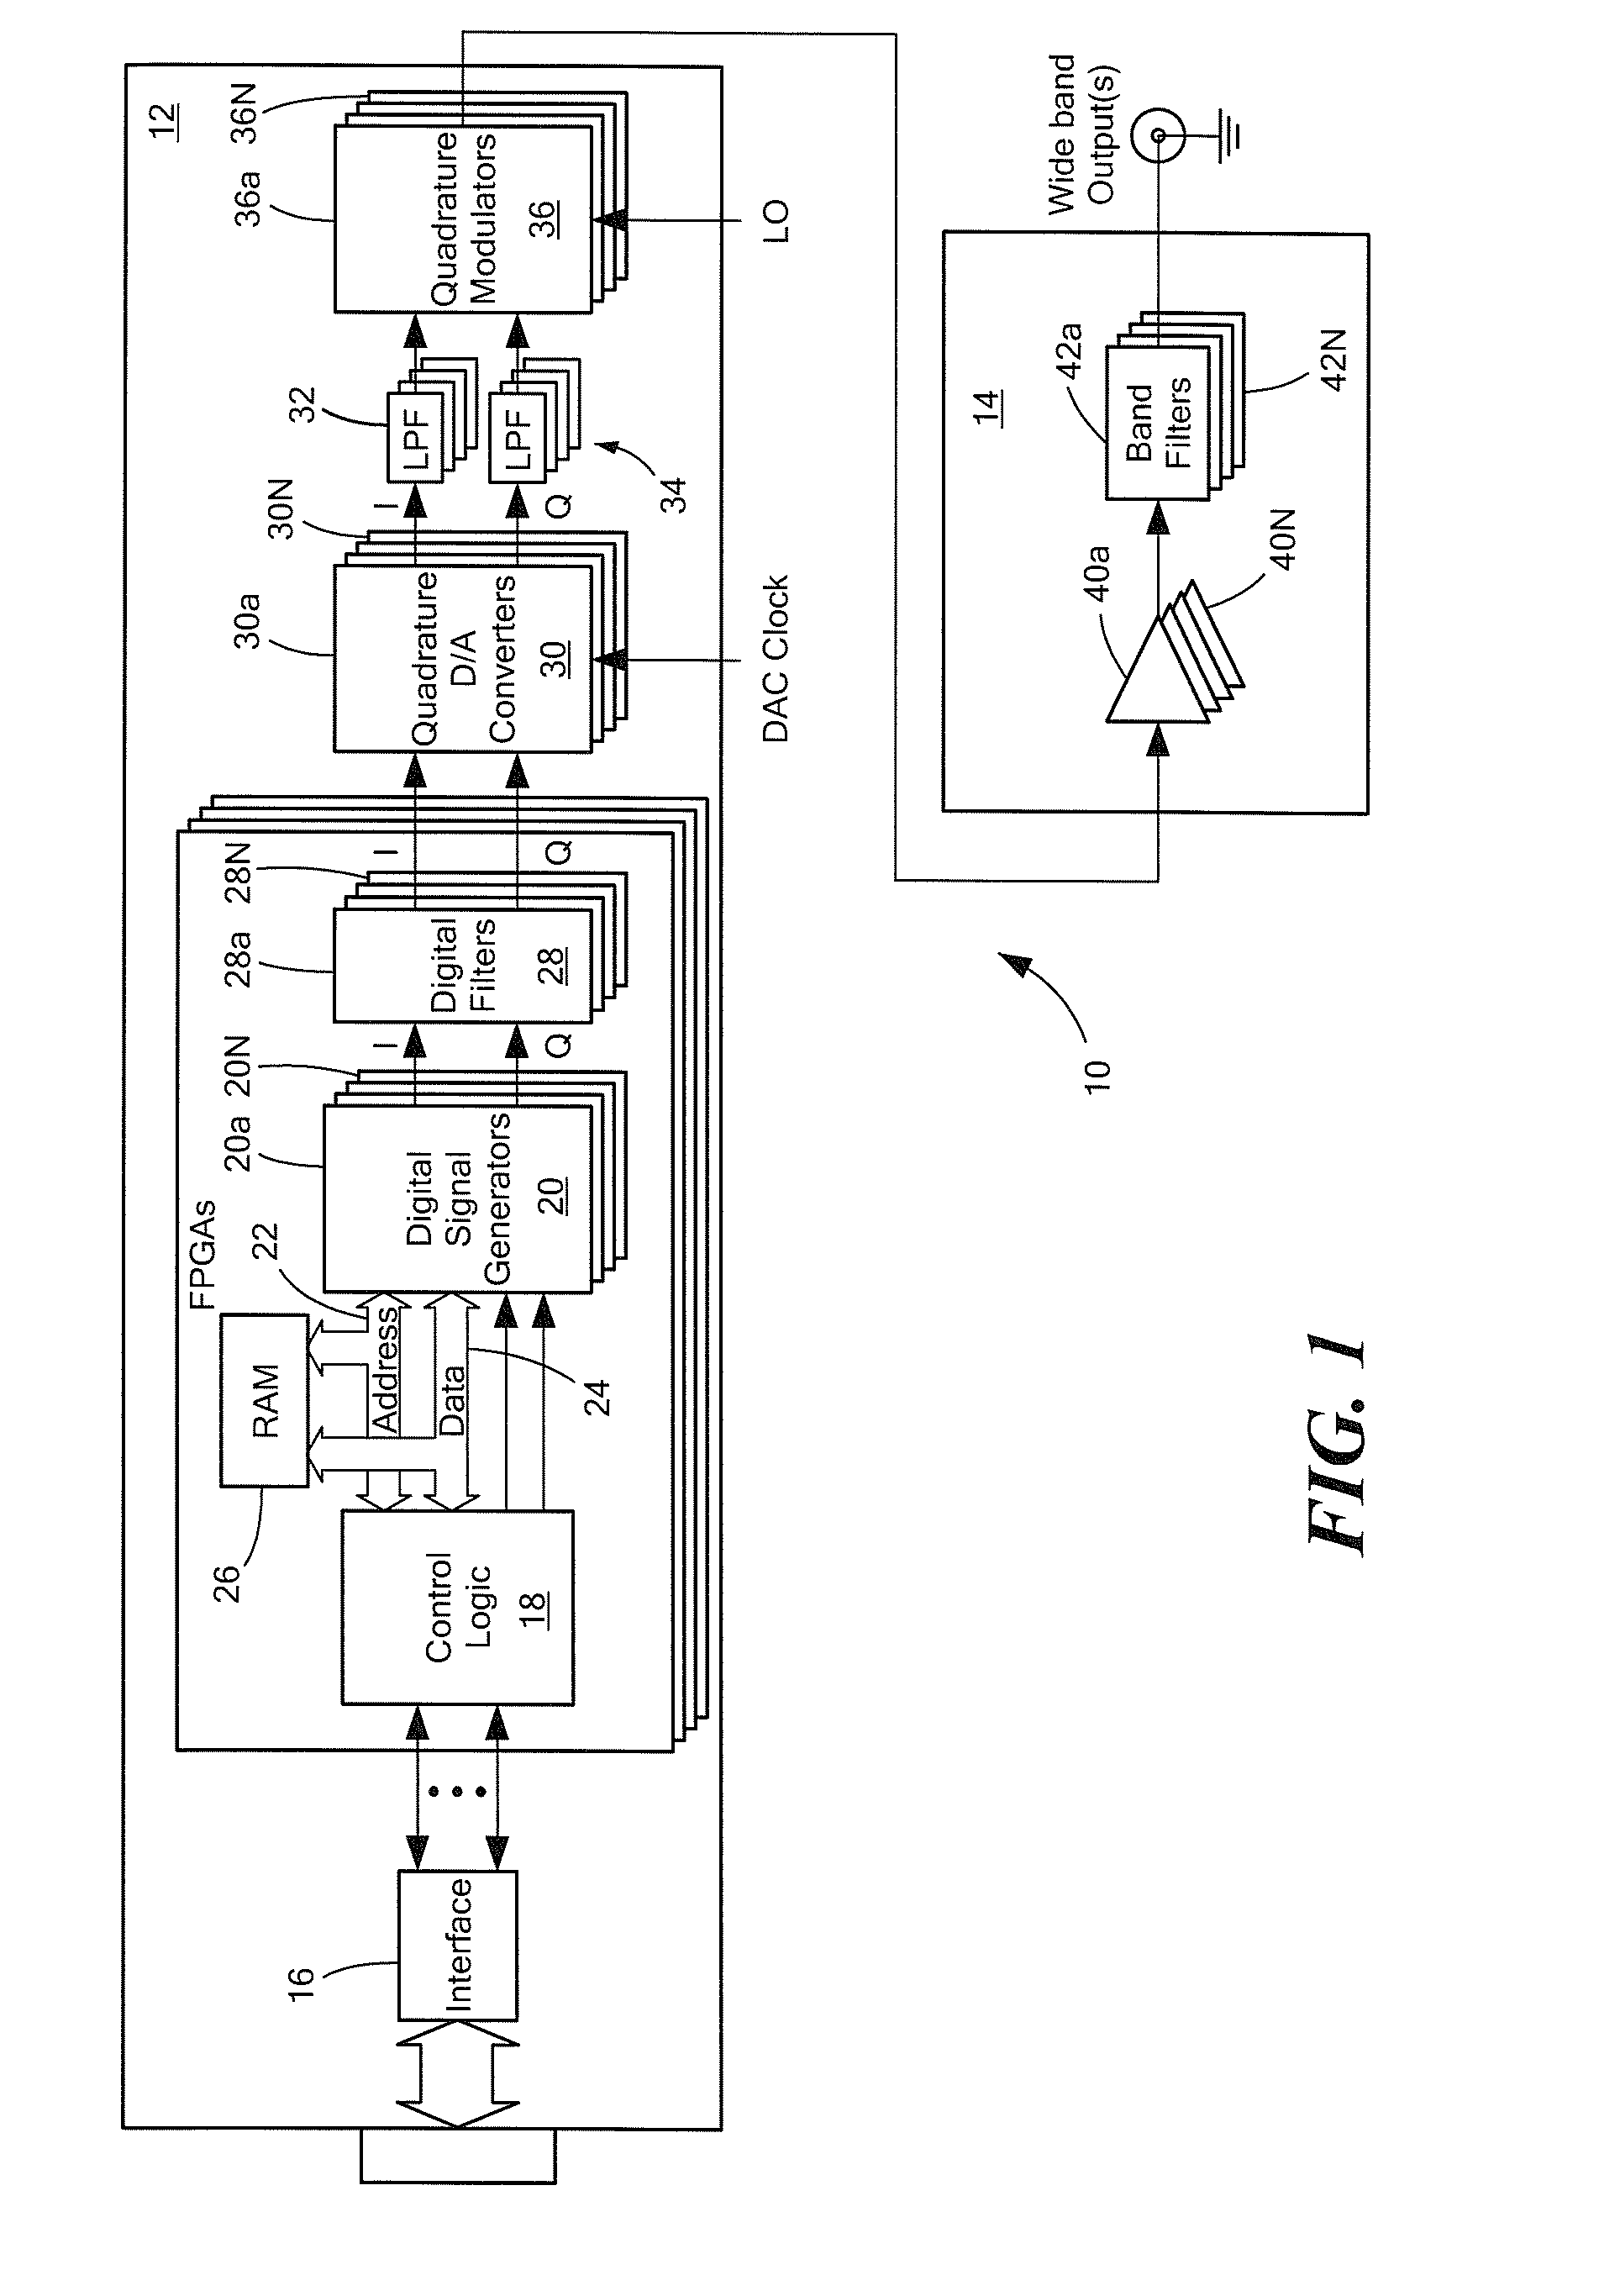 Method and apparatus for generation of radio frequency jamming signals